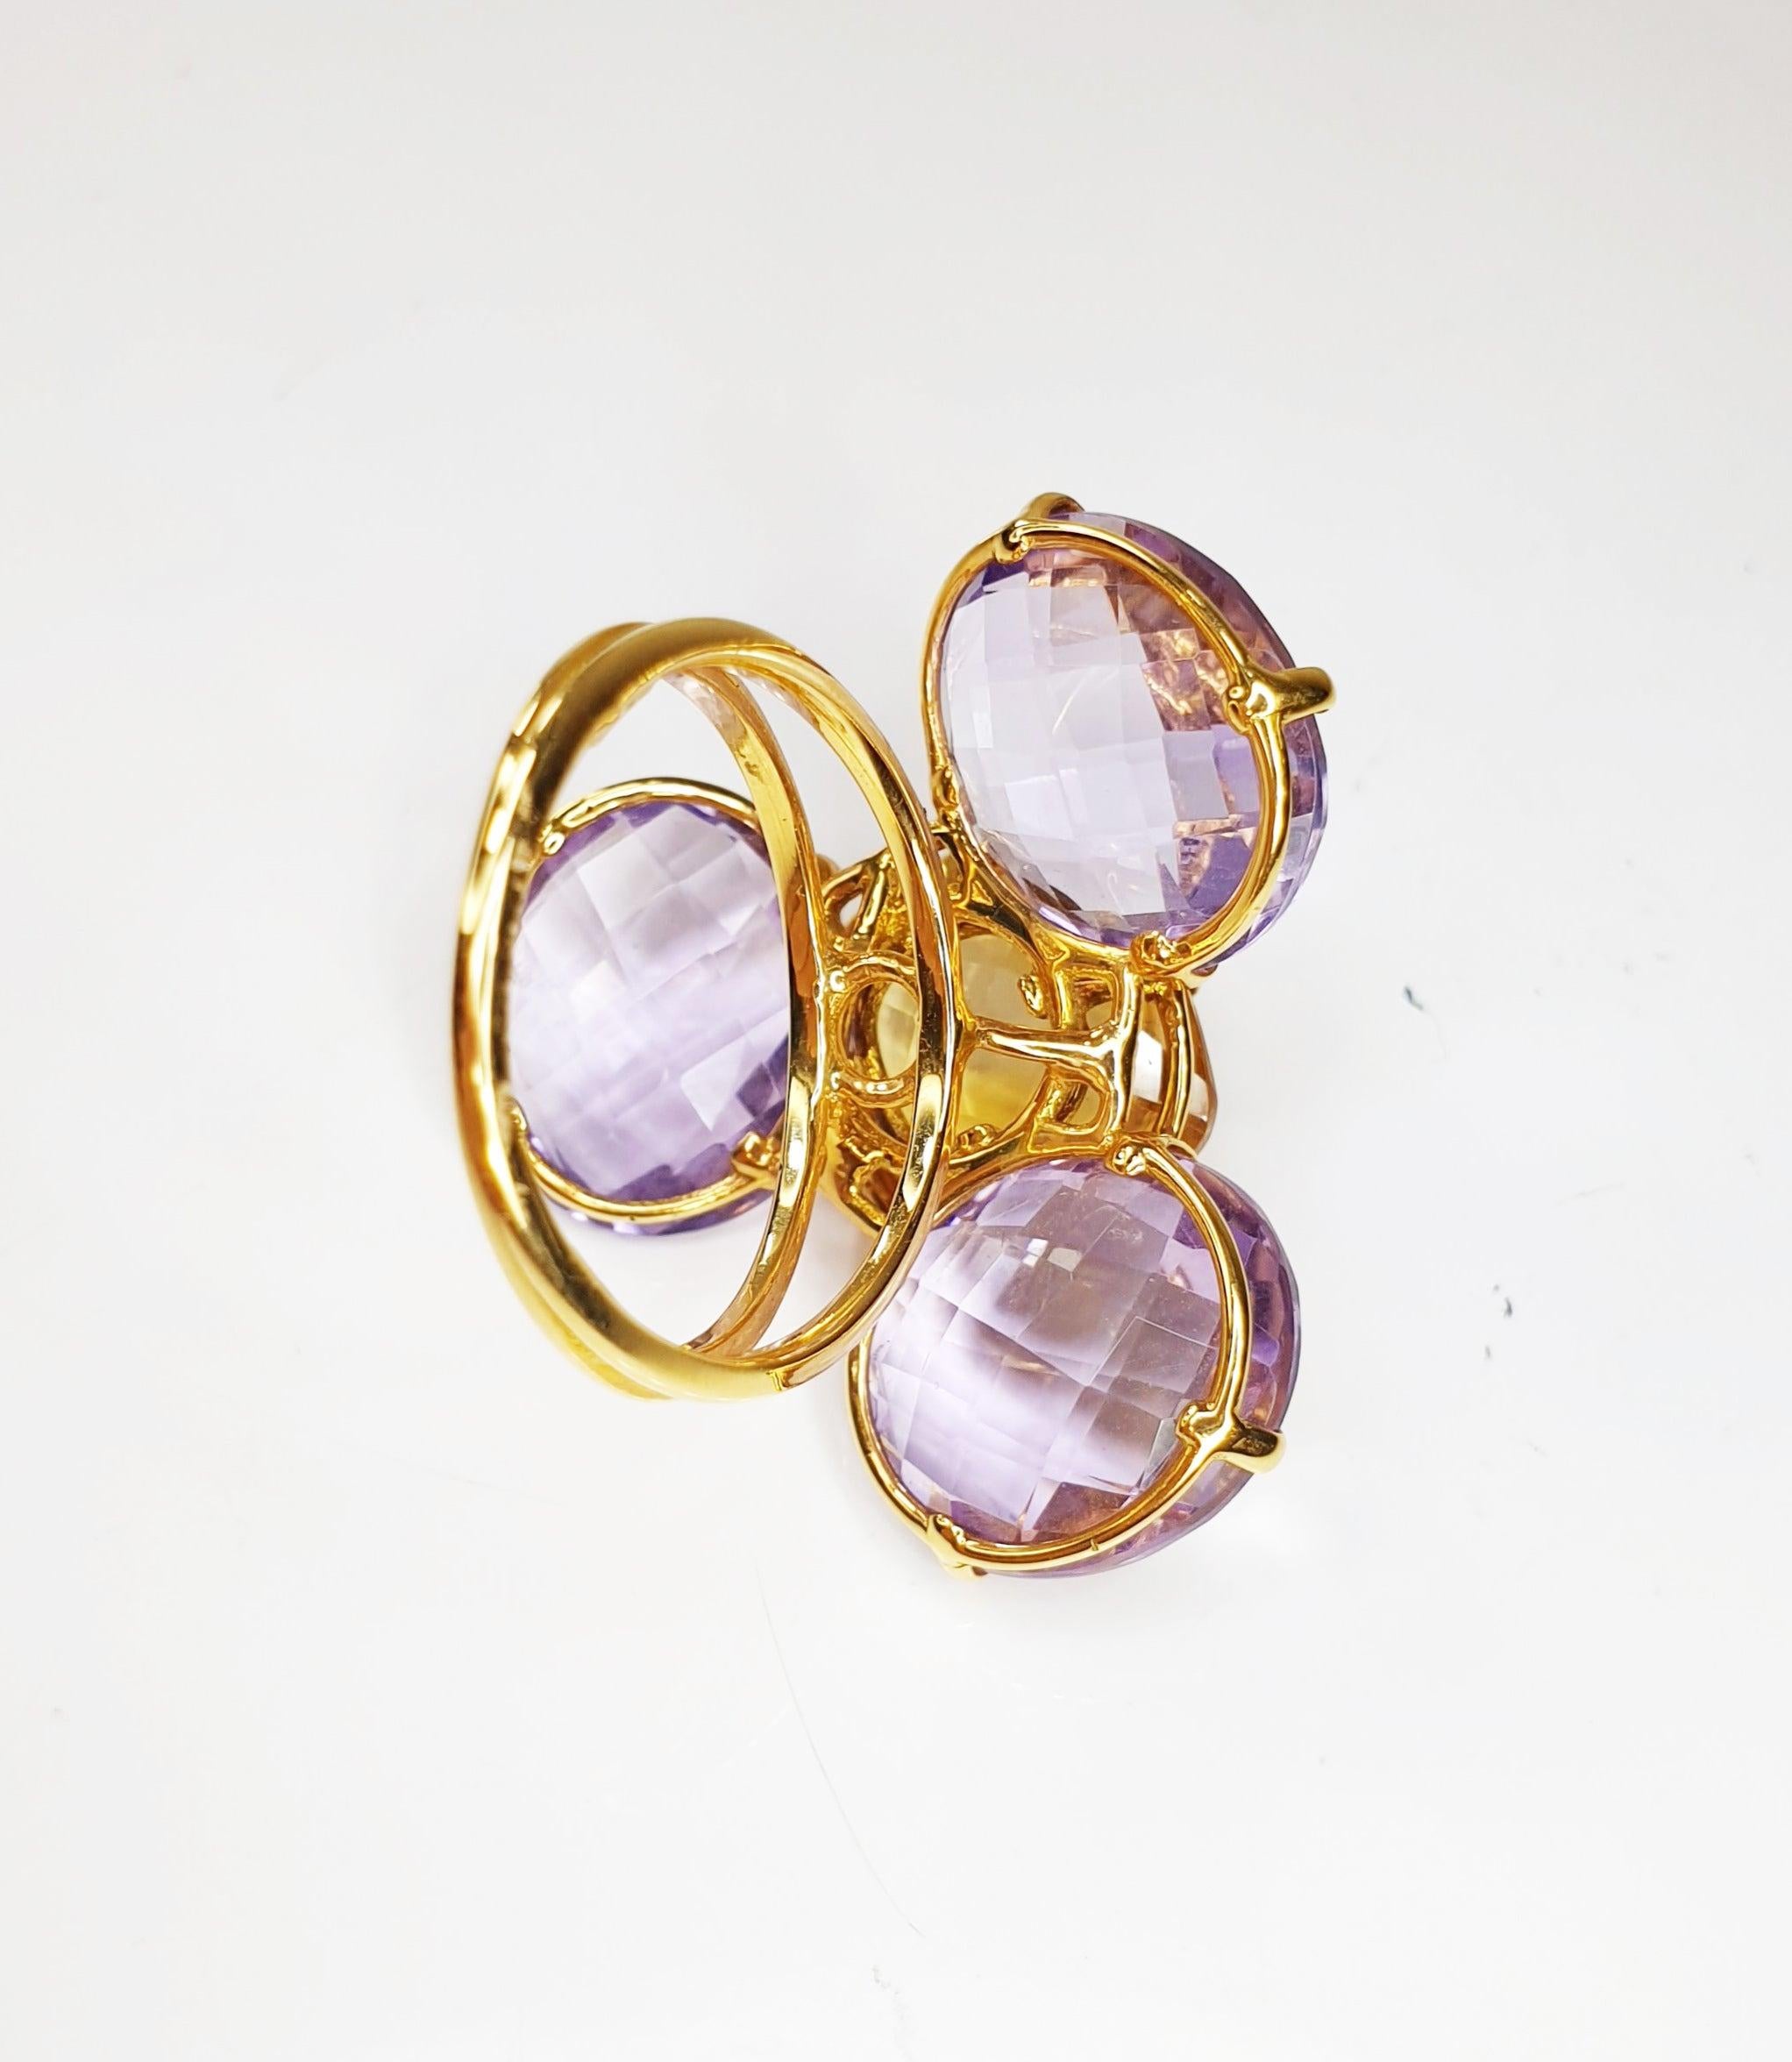 Multiphaceted Flower Ring with Central Citrine and Three Amethysts 6